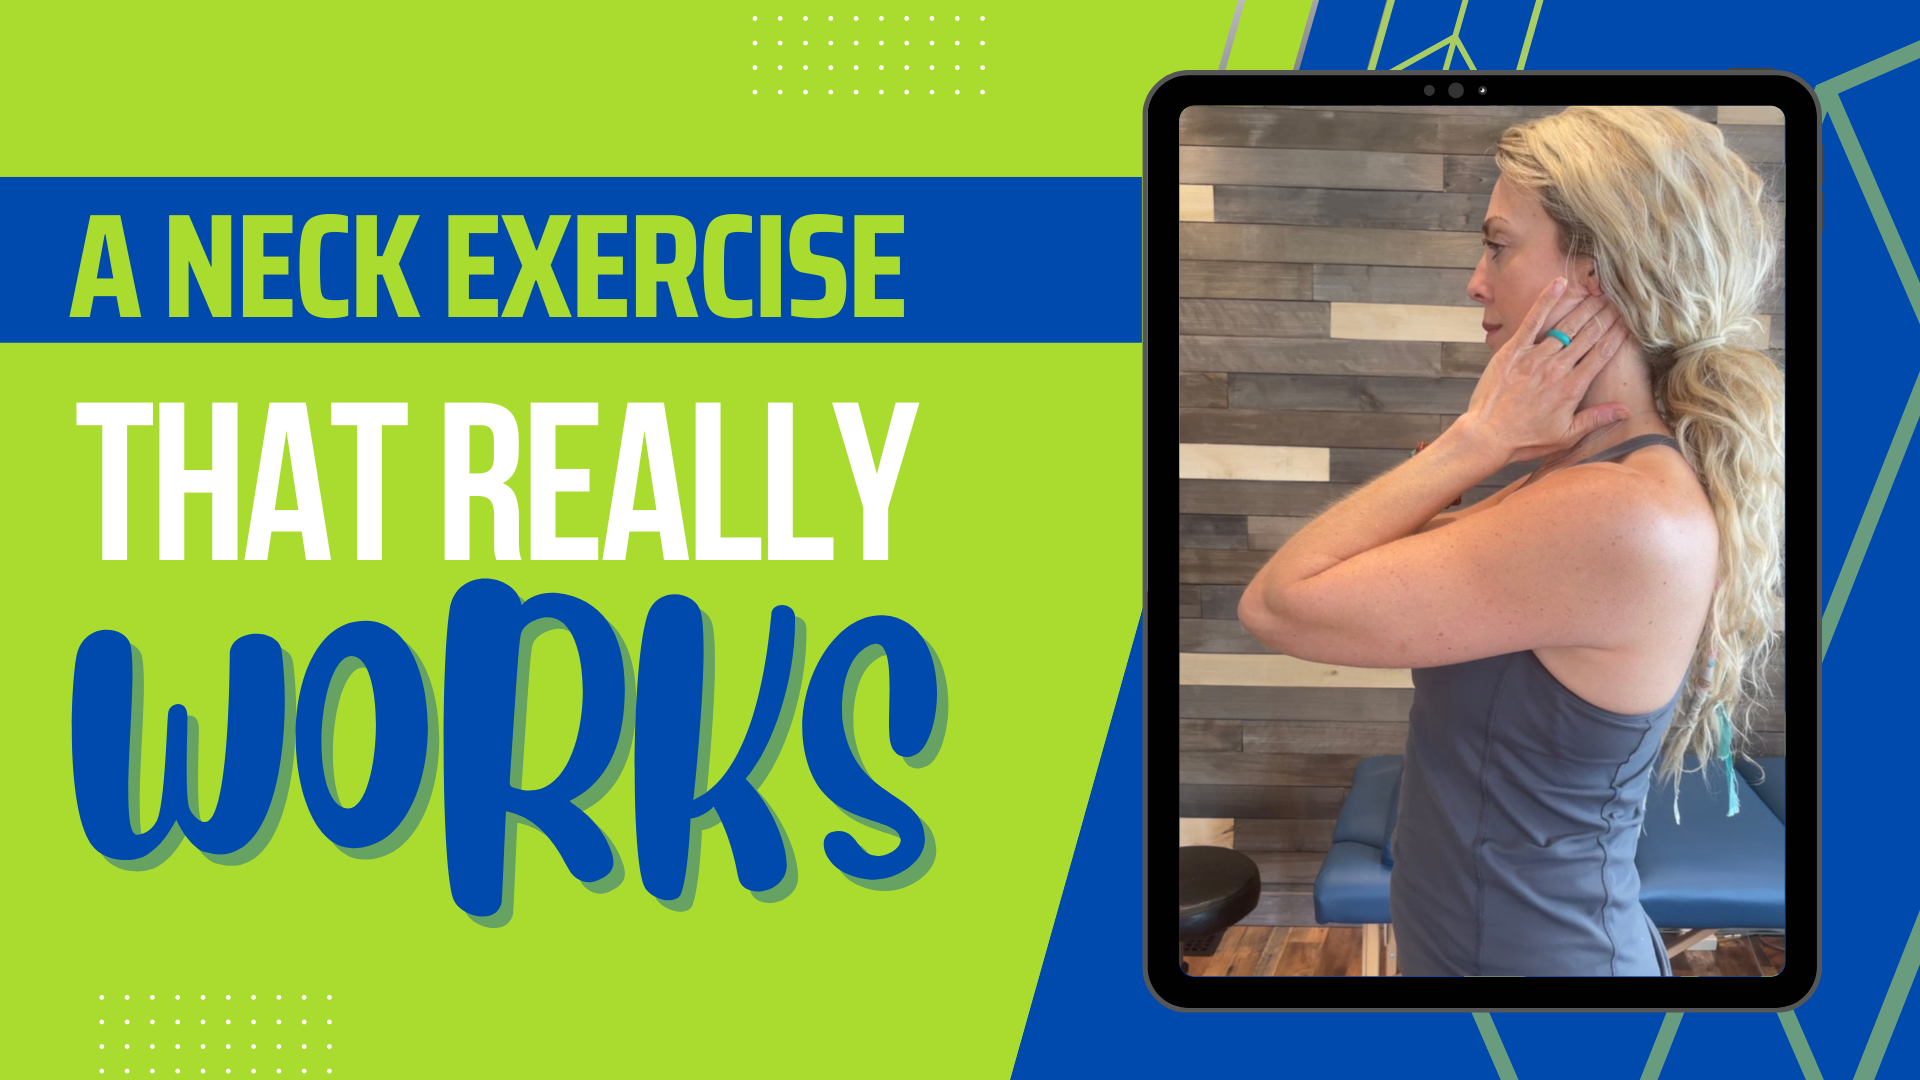 Neck exercise that really works